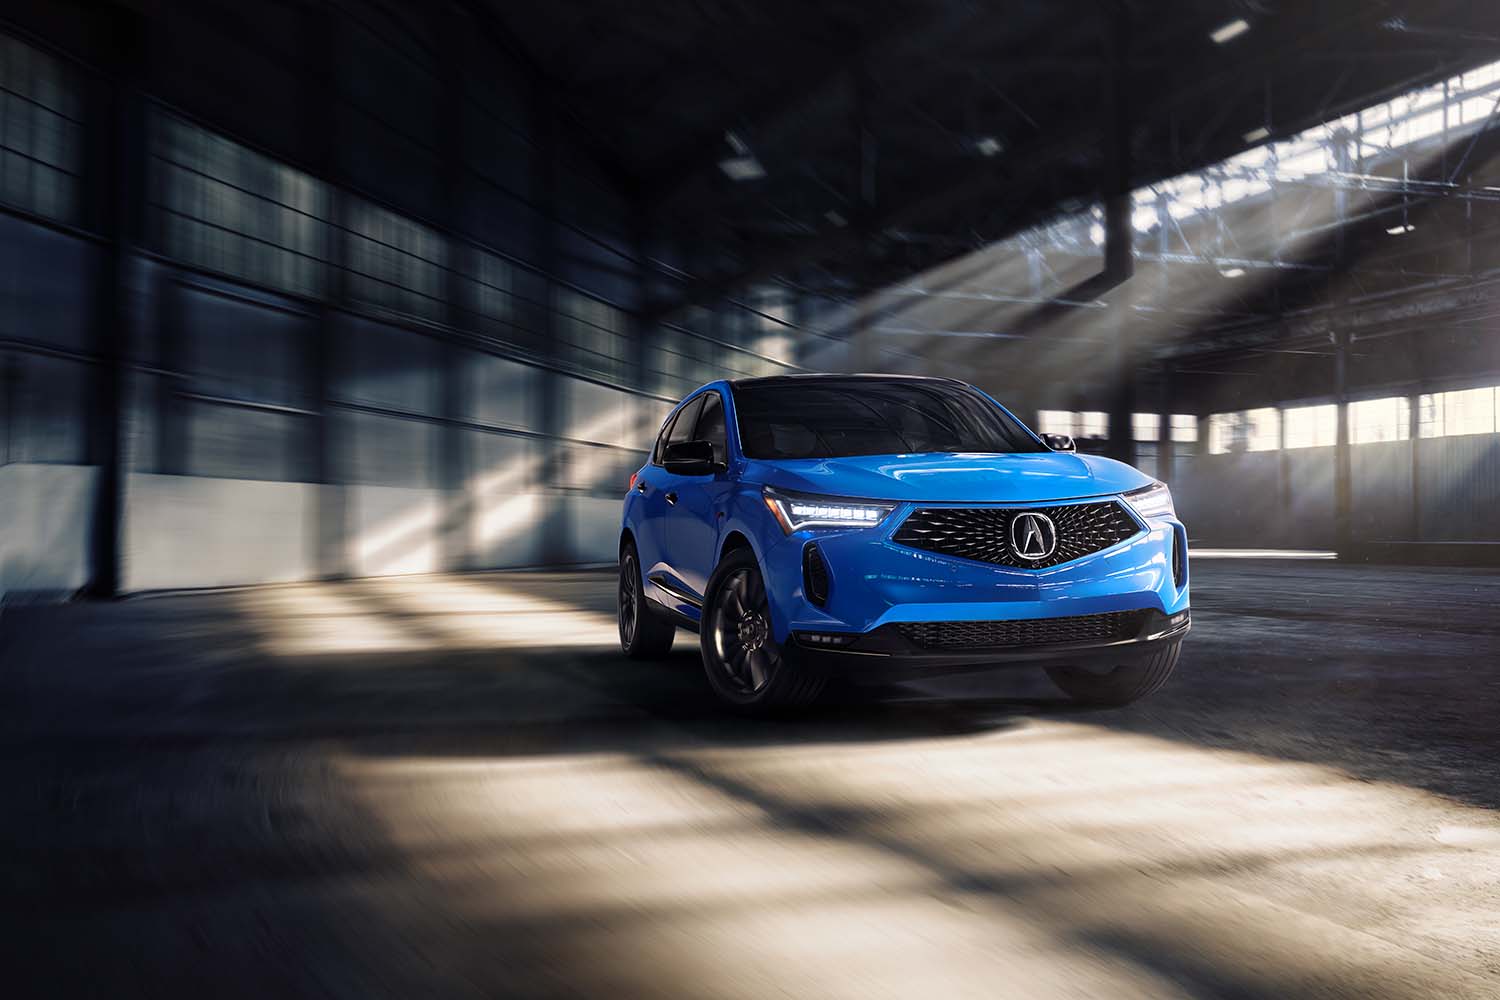 2022 Acura RDX driving in an empty parking garage